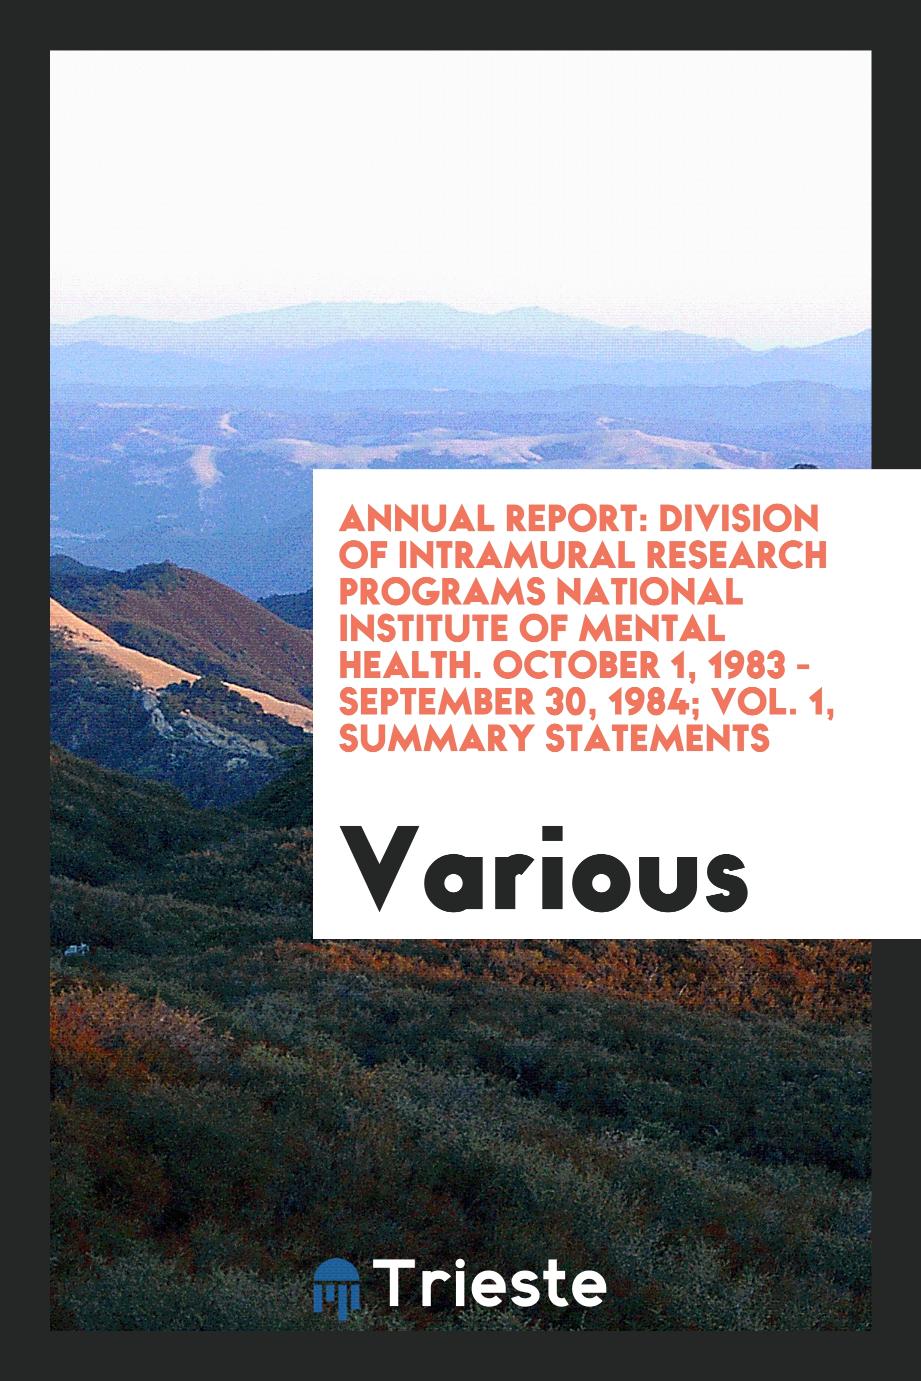 Annual report: Division of Intramural Research Programs National Institute of Mental Health. October 1, 1983 - September 30, 1984; Vol. 1, Summary statements